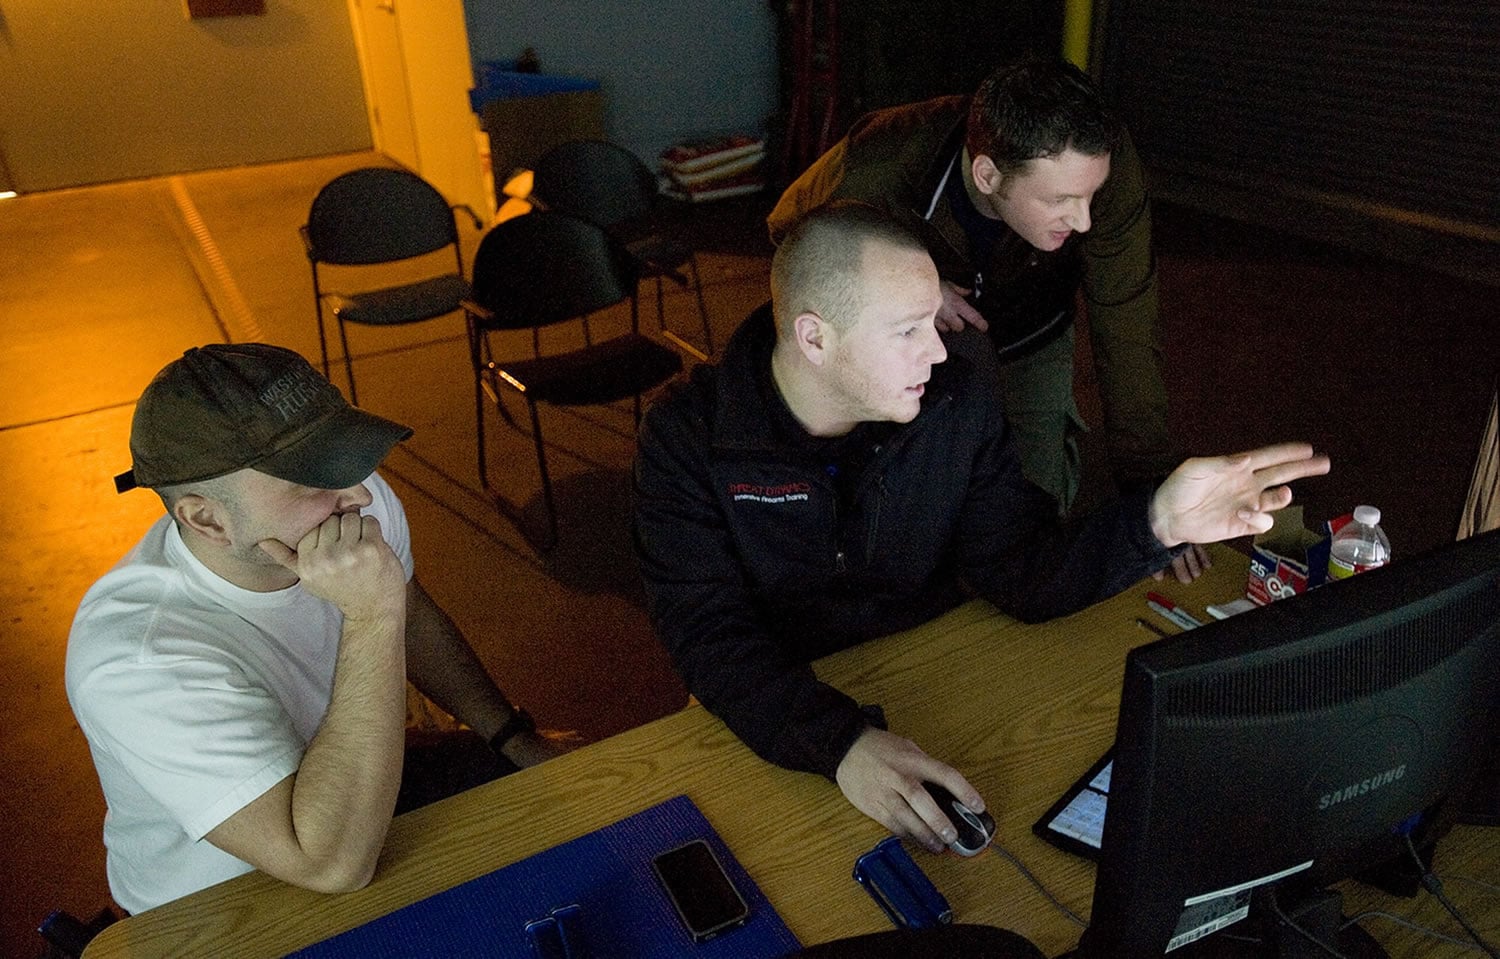 After a session, Camas Police officers Henry Scott, left, and Tim Fellows, right, have their performance reviewed by system operator Josh Detar.